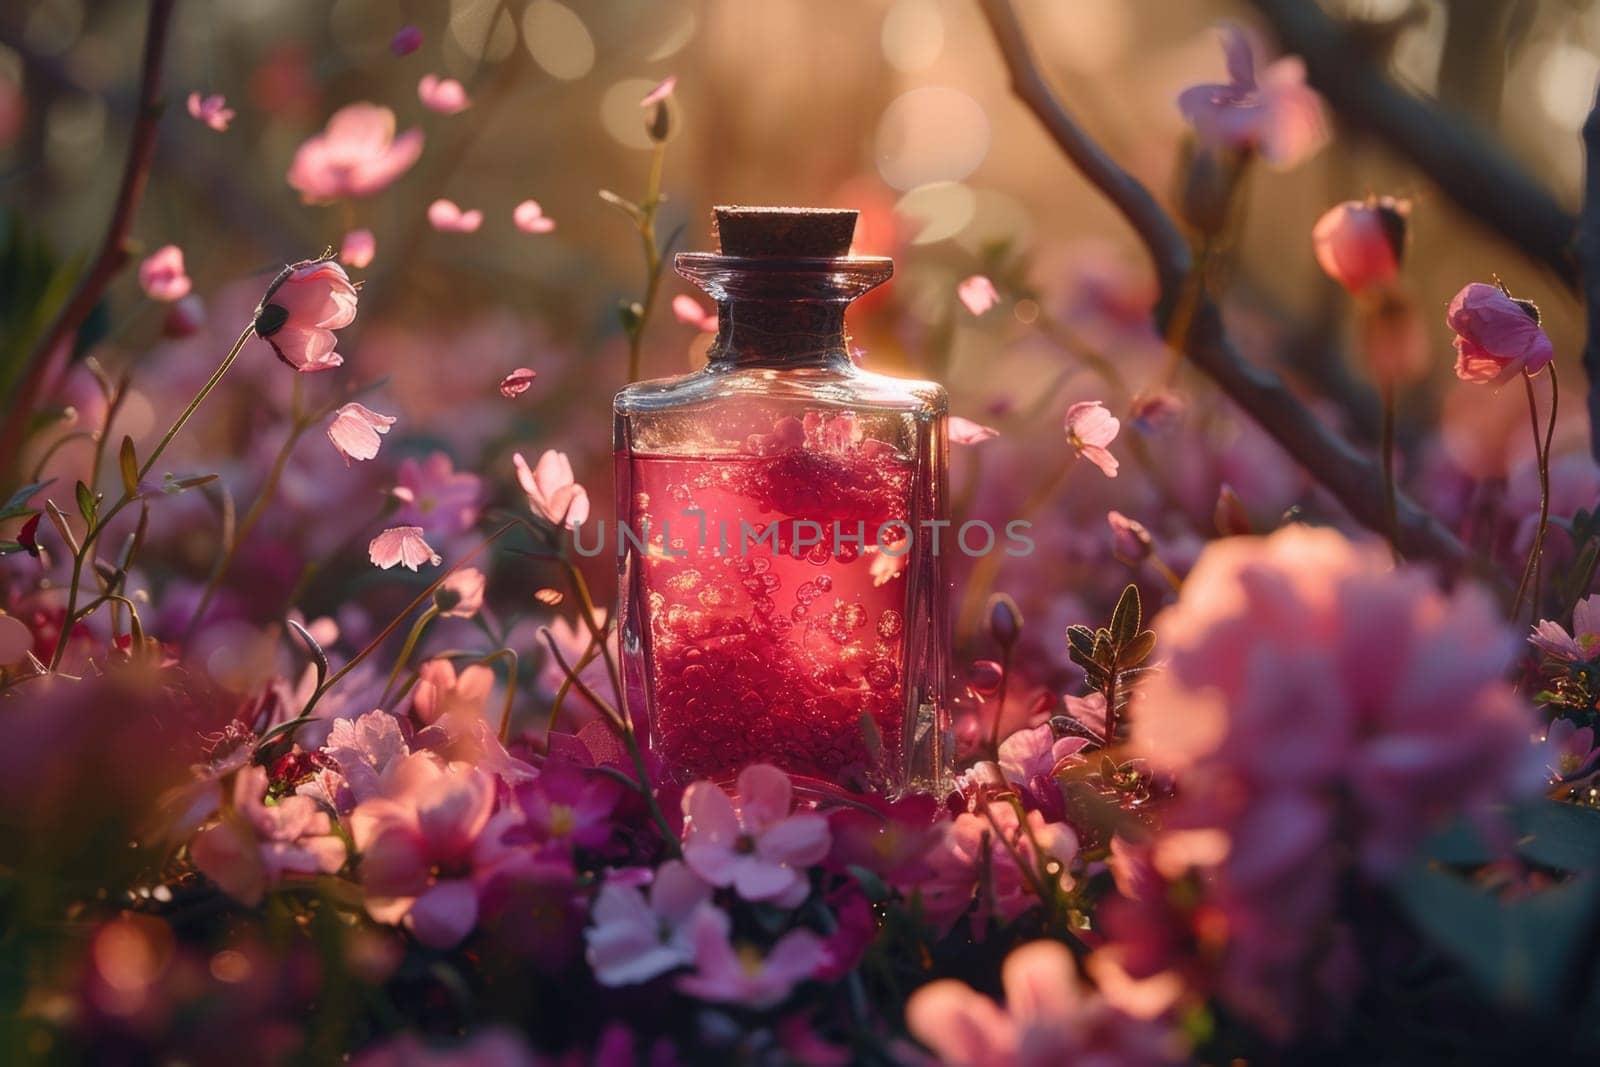 A jar filled with liquid sits among vibrant flowers, creating a colorful and striking composition.